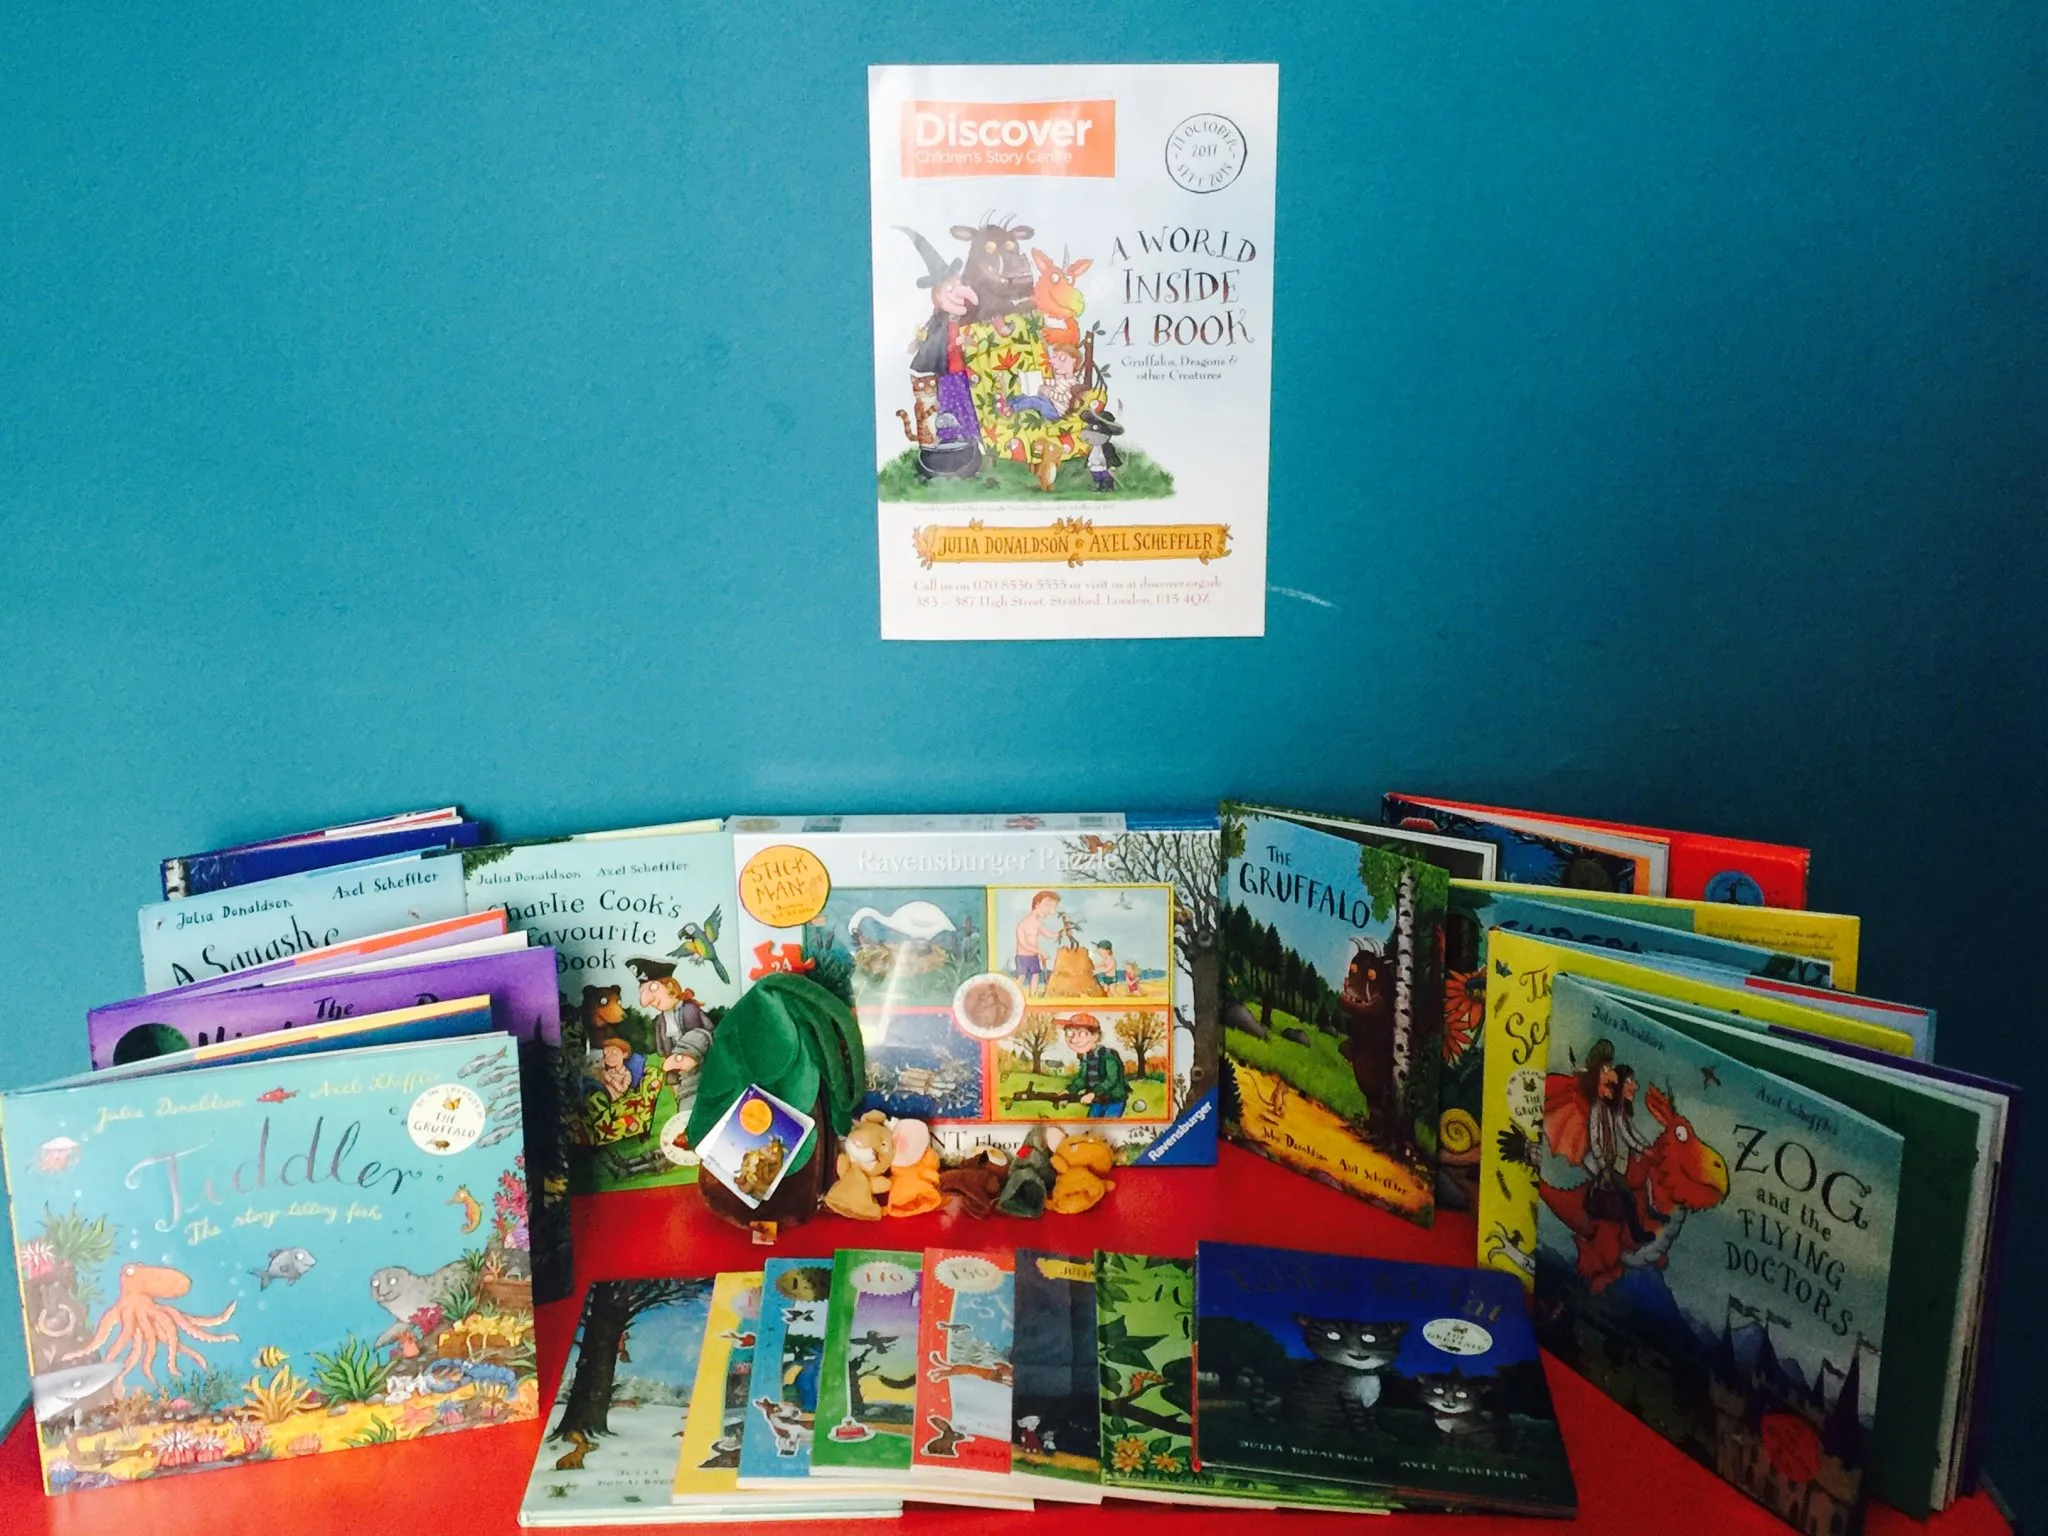 We have £250 of AMAZING goodies to give away from Julia Donaldson and Axel Scheffler to celebrate the Discover Children's Story Centre's amazing exhibition...including tickets for the event in October 21st, which runs for a whole year! Com visit the blog to find out all about the event!